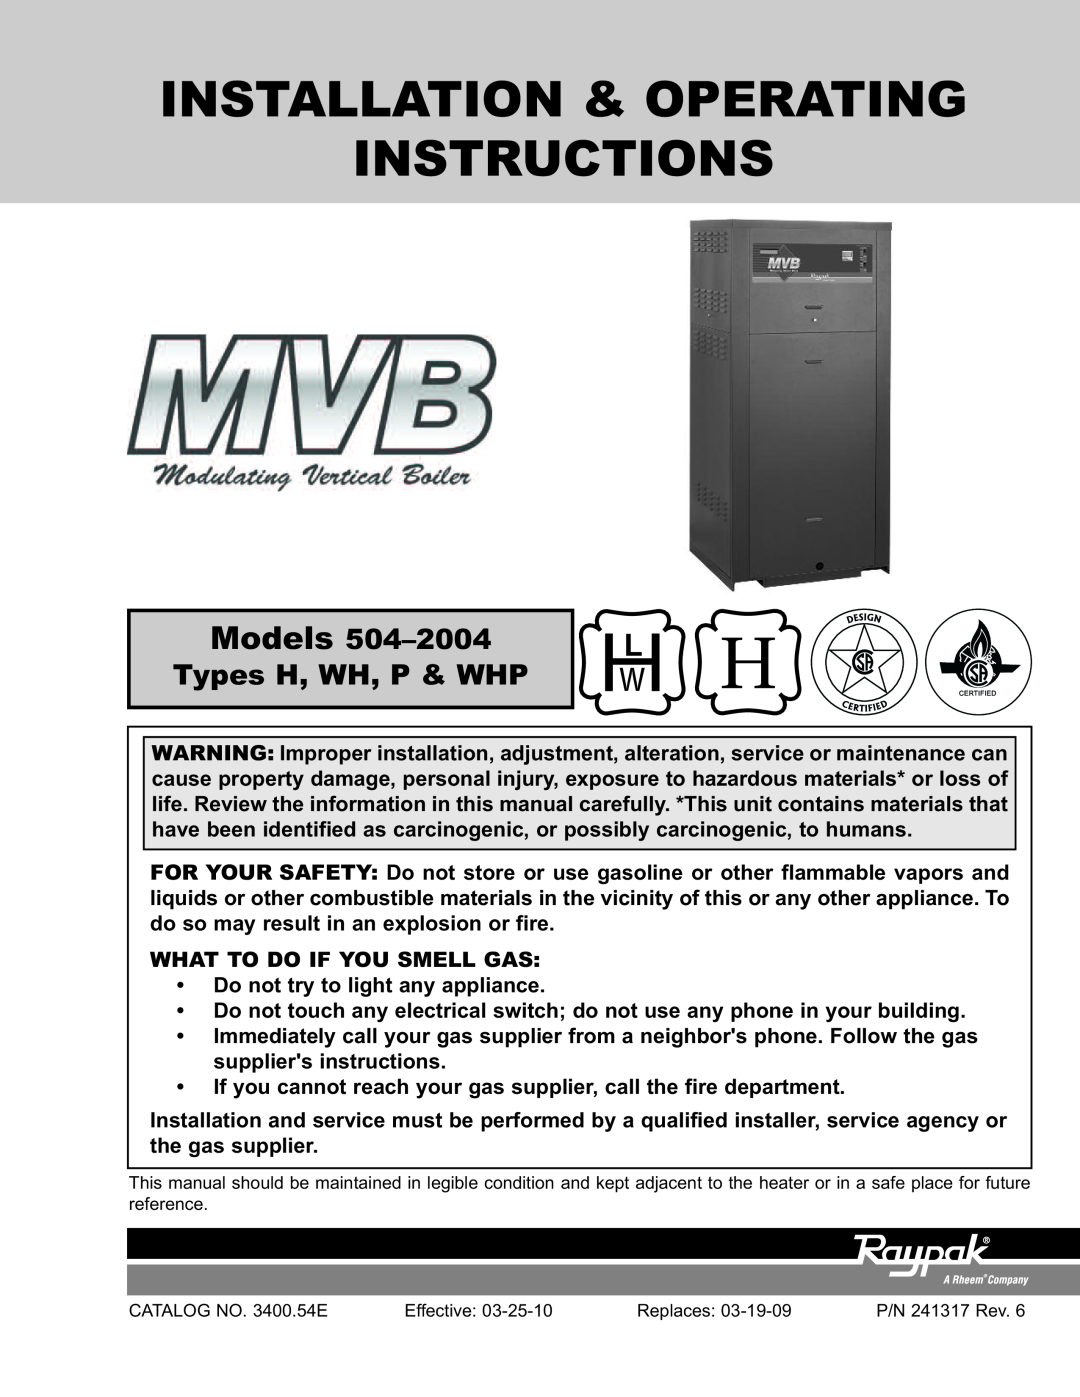 Raypak 5042004 operating instructions Installation & Operating Instructions, Models 504–2004 Types H, WH, P & WHP 